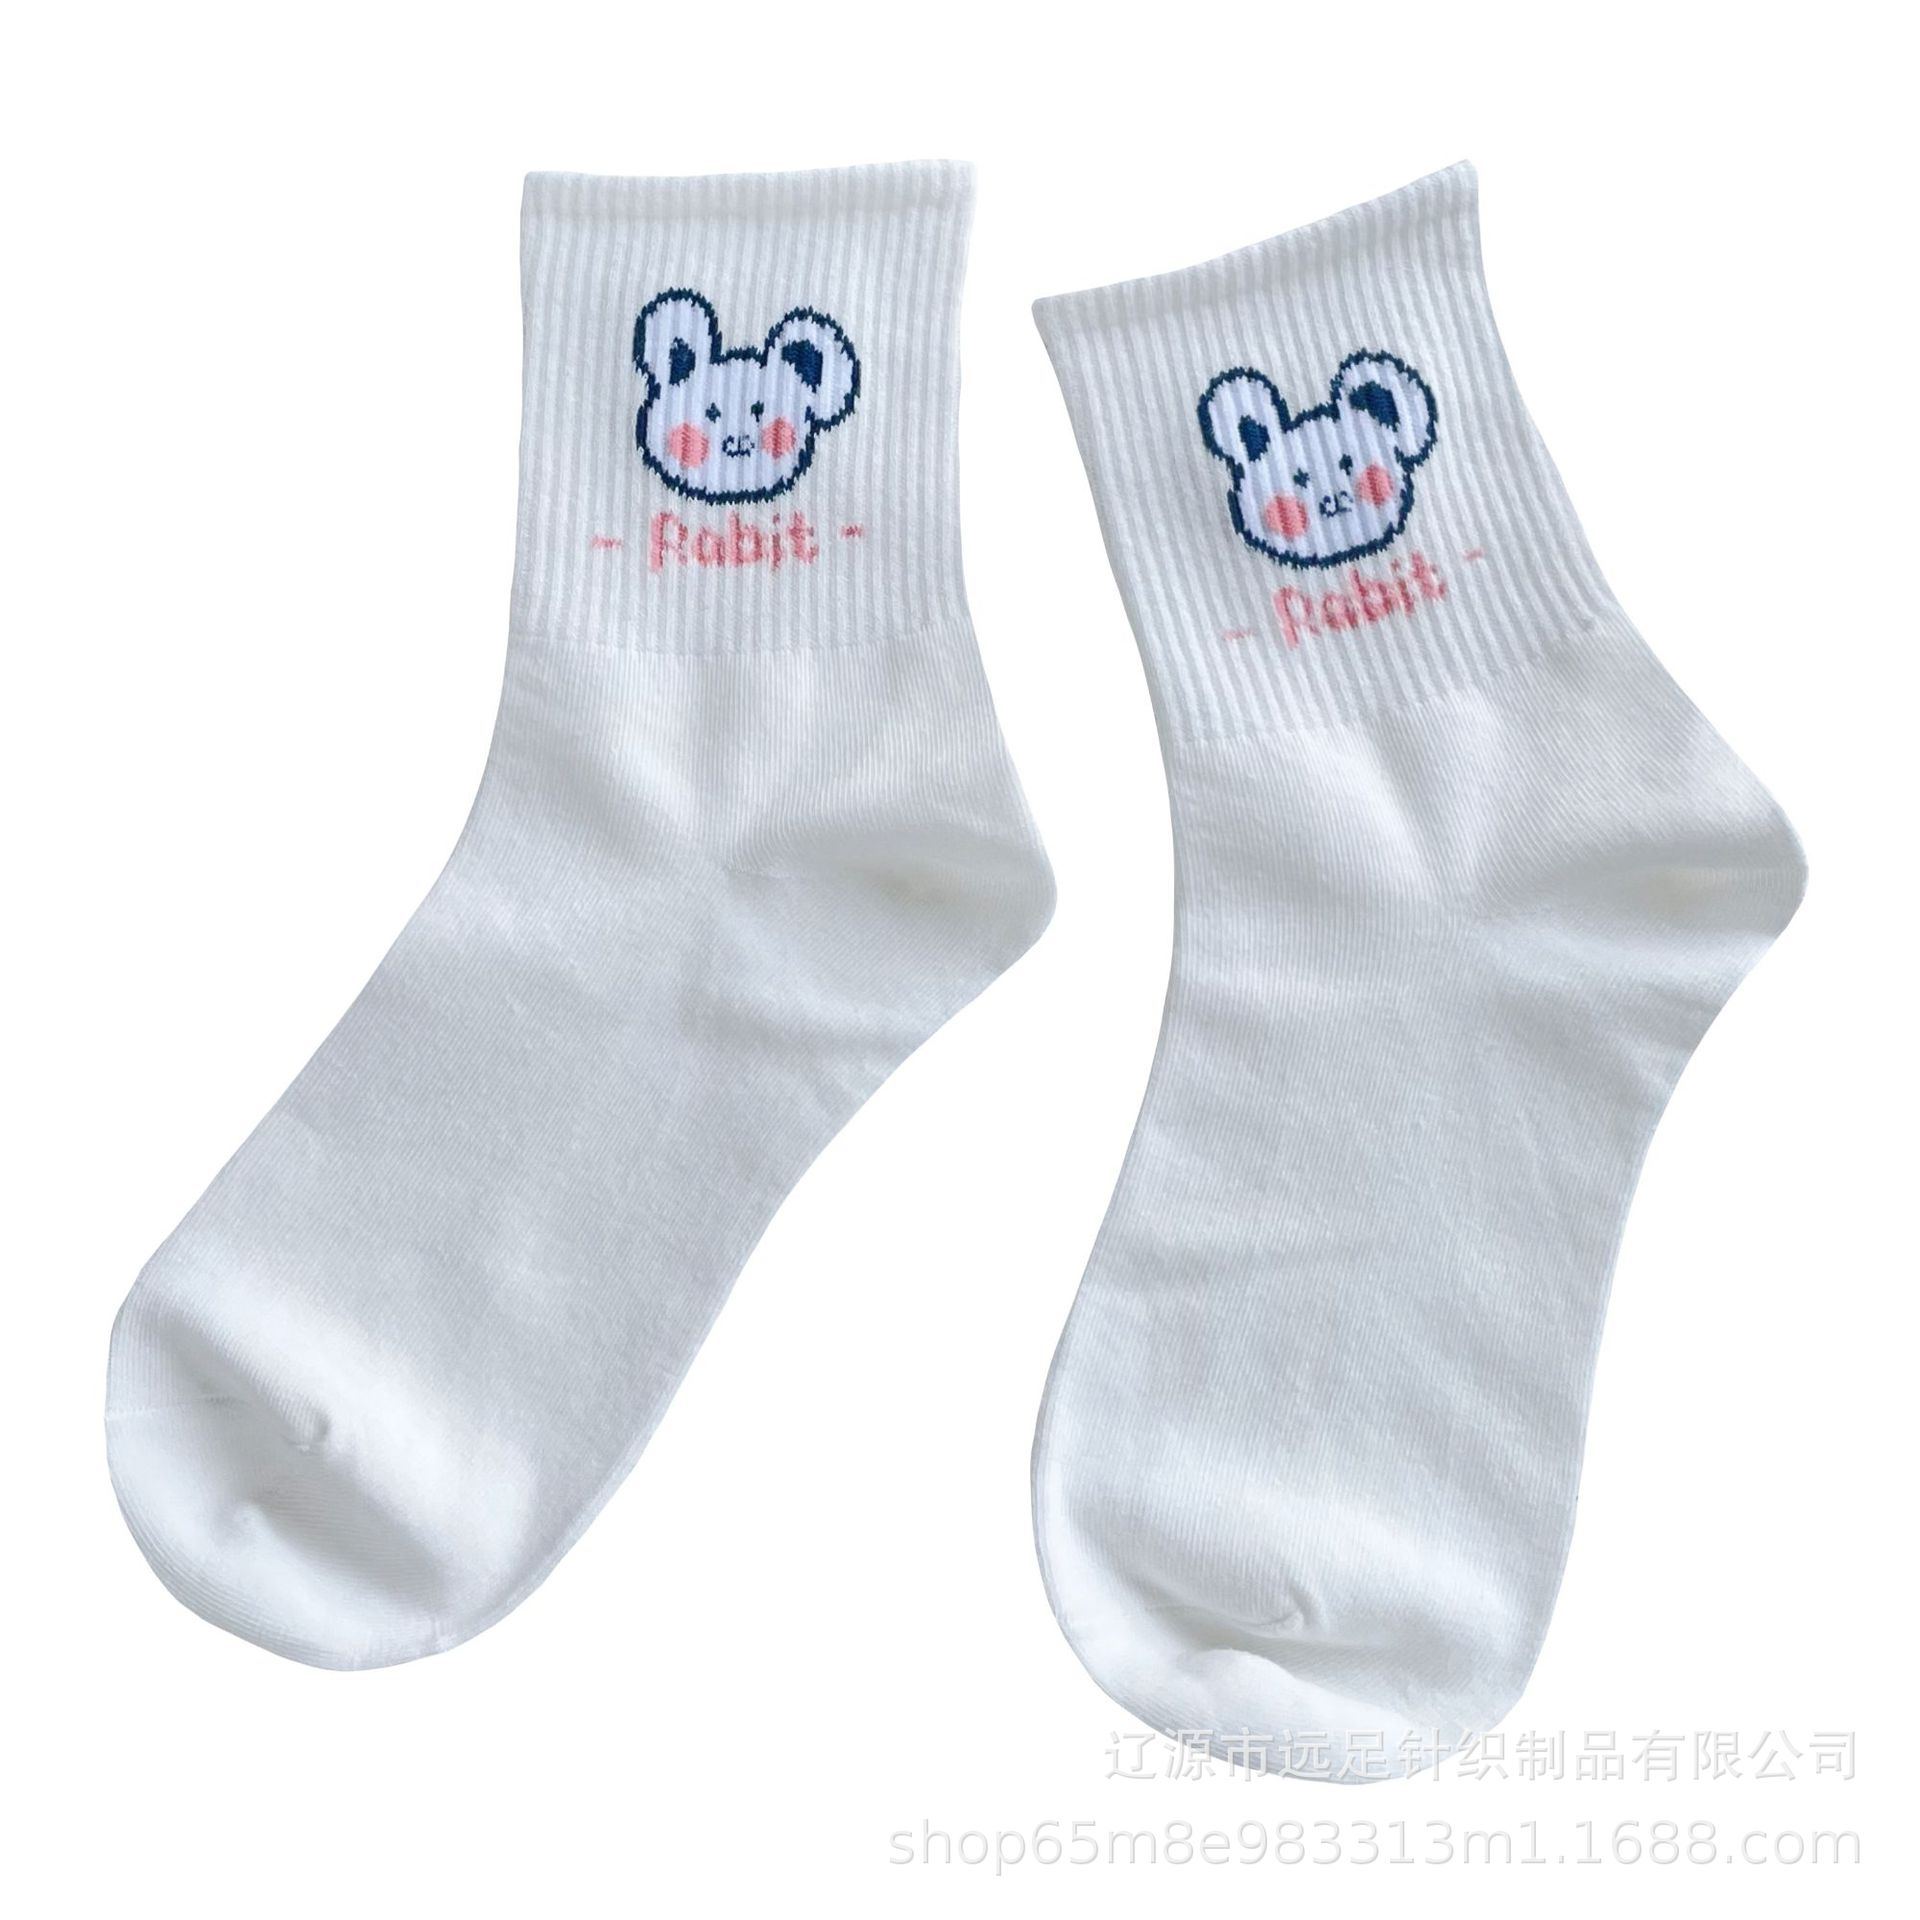 Women's casual and versatile personality Japanese sweet and simple trend cartoon ultra short tube (boat socks) socks